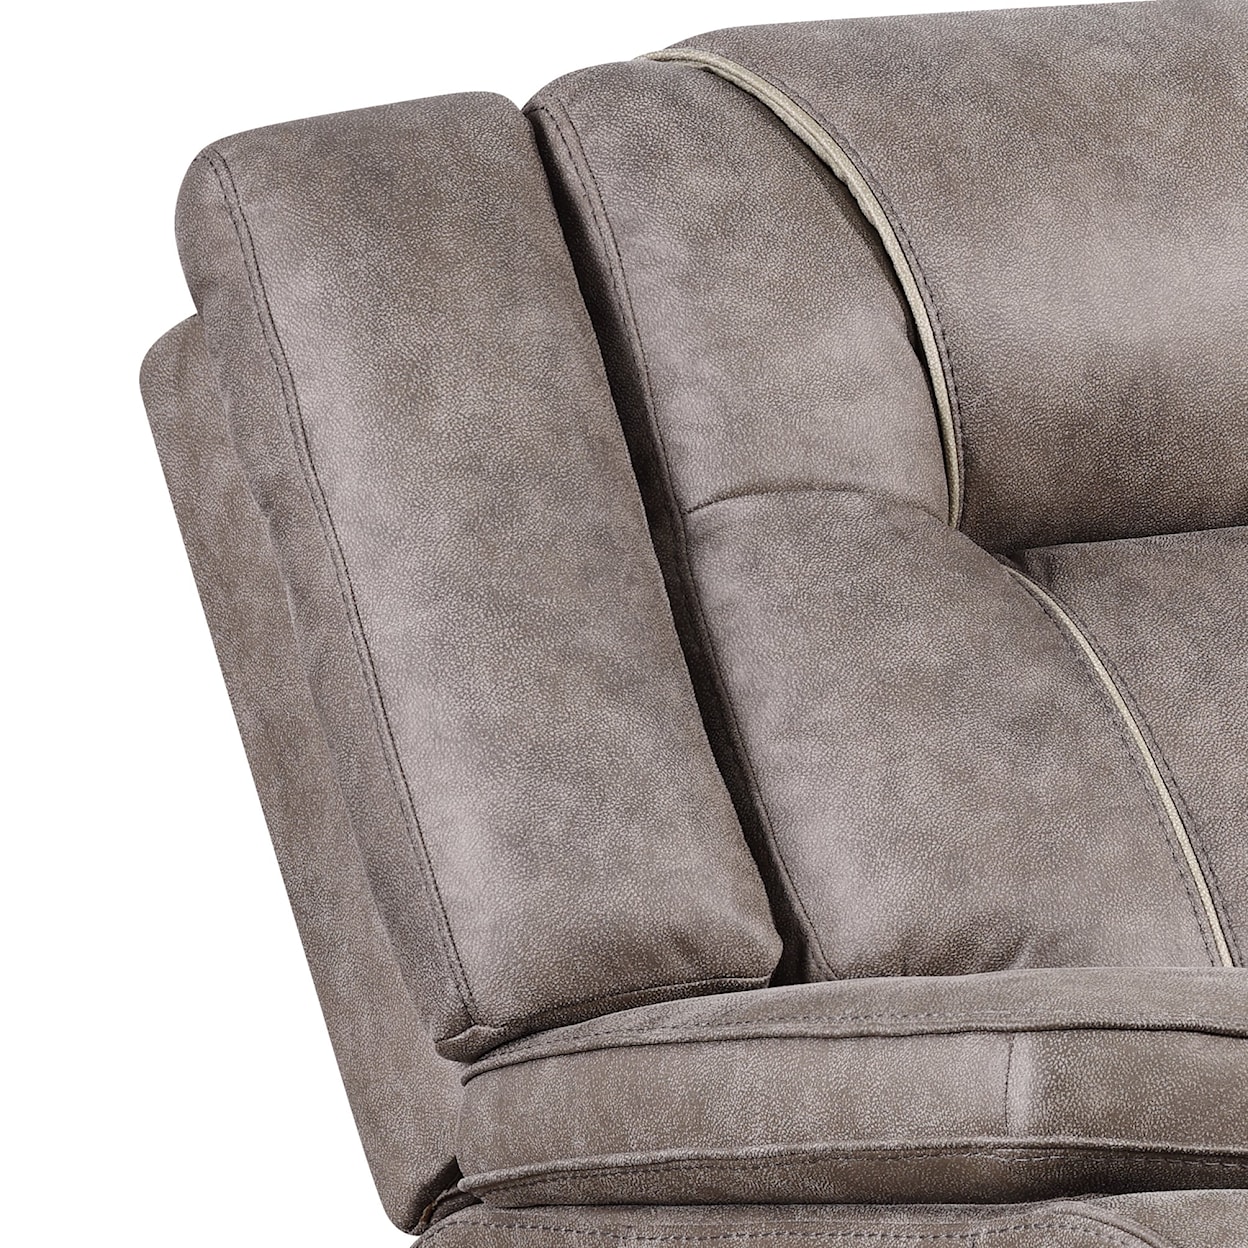 Paramount Living Blake Manual Reclining Loveseat with Console